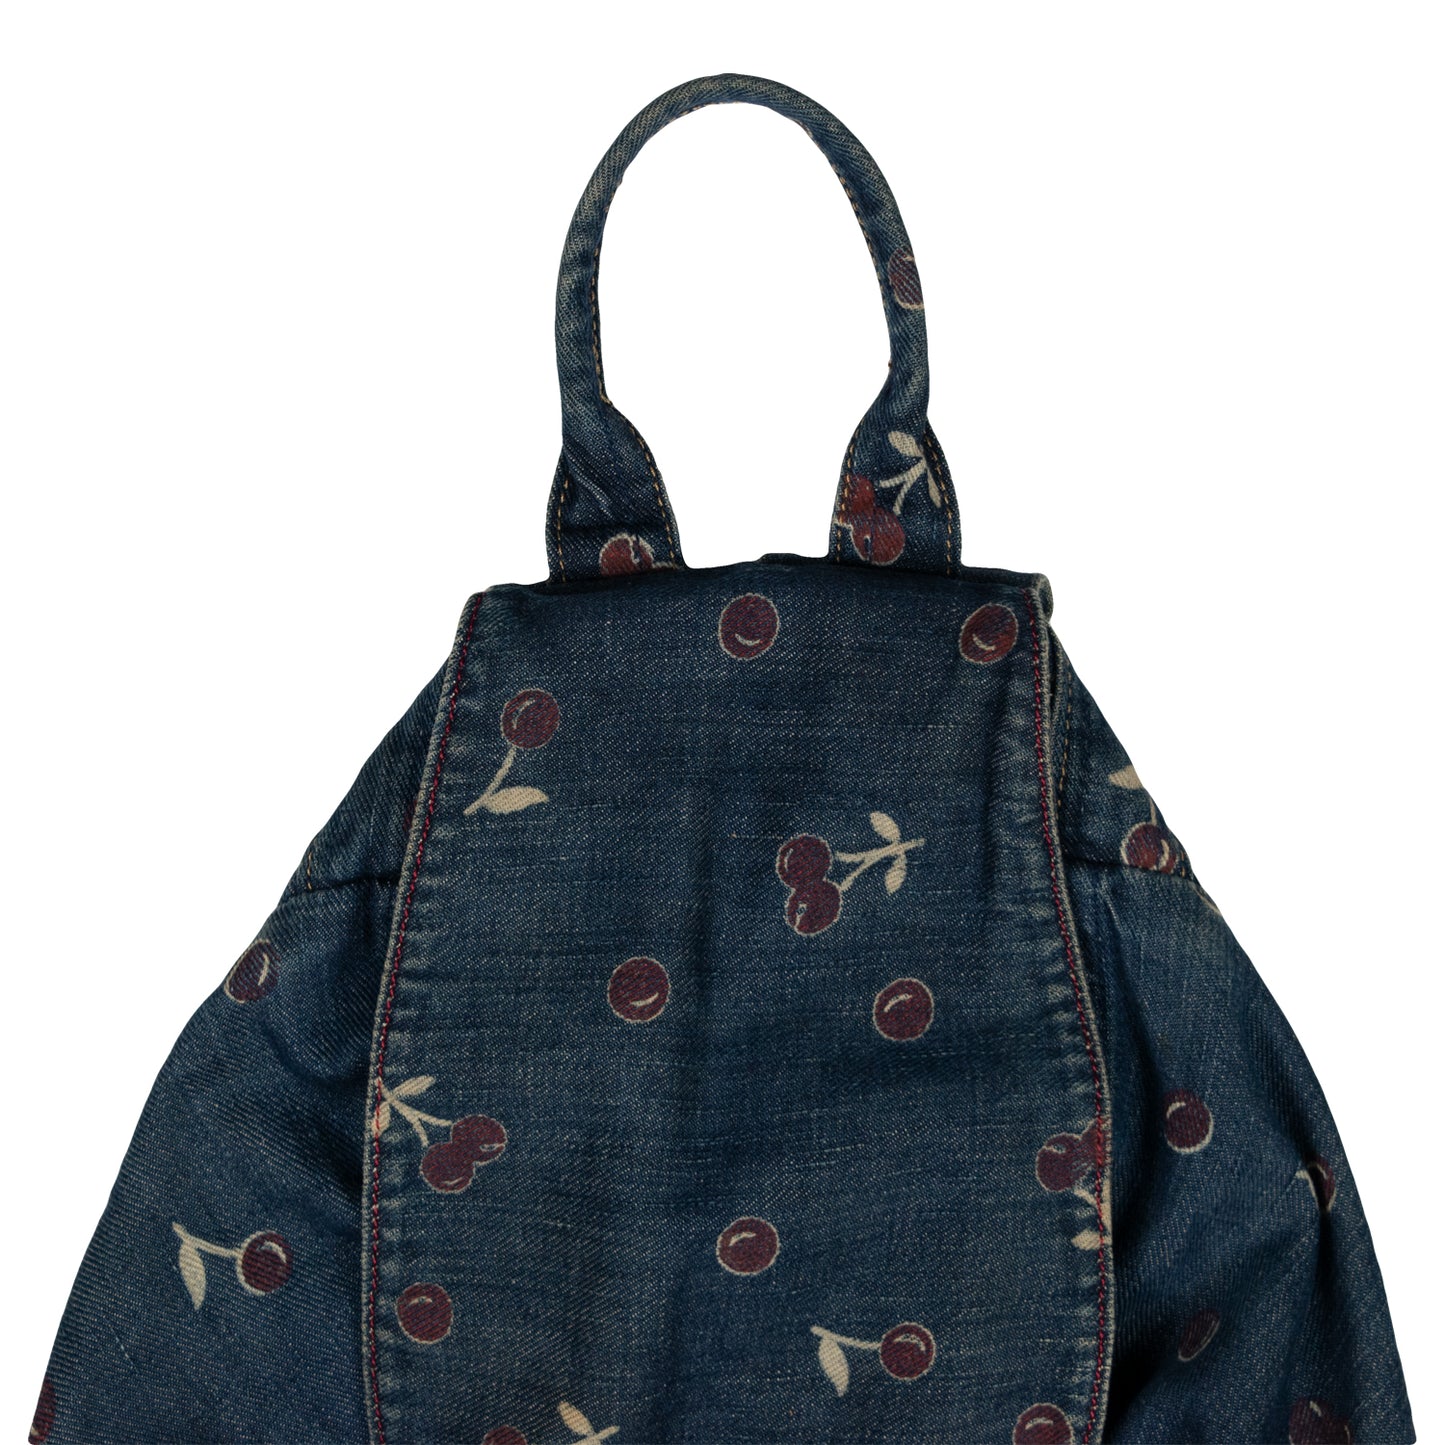 Hysteric Glamour Cherry All Over Print Backpack